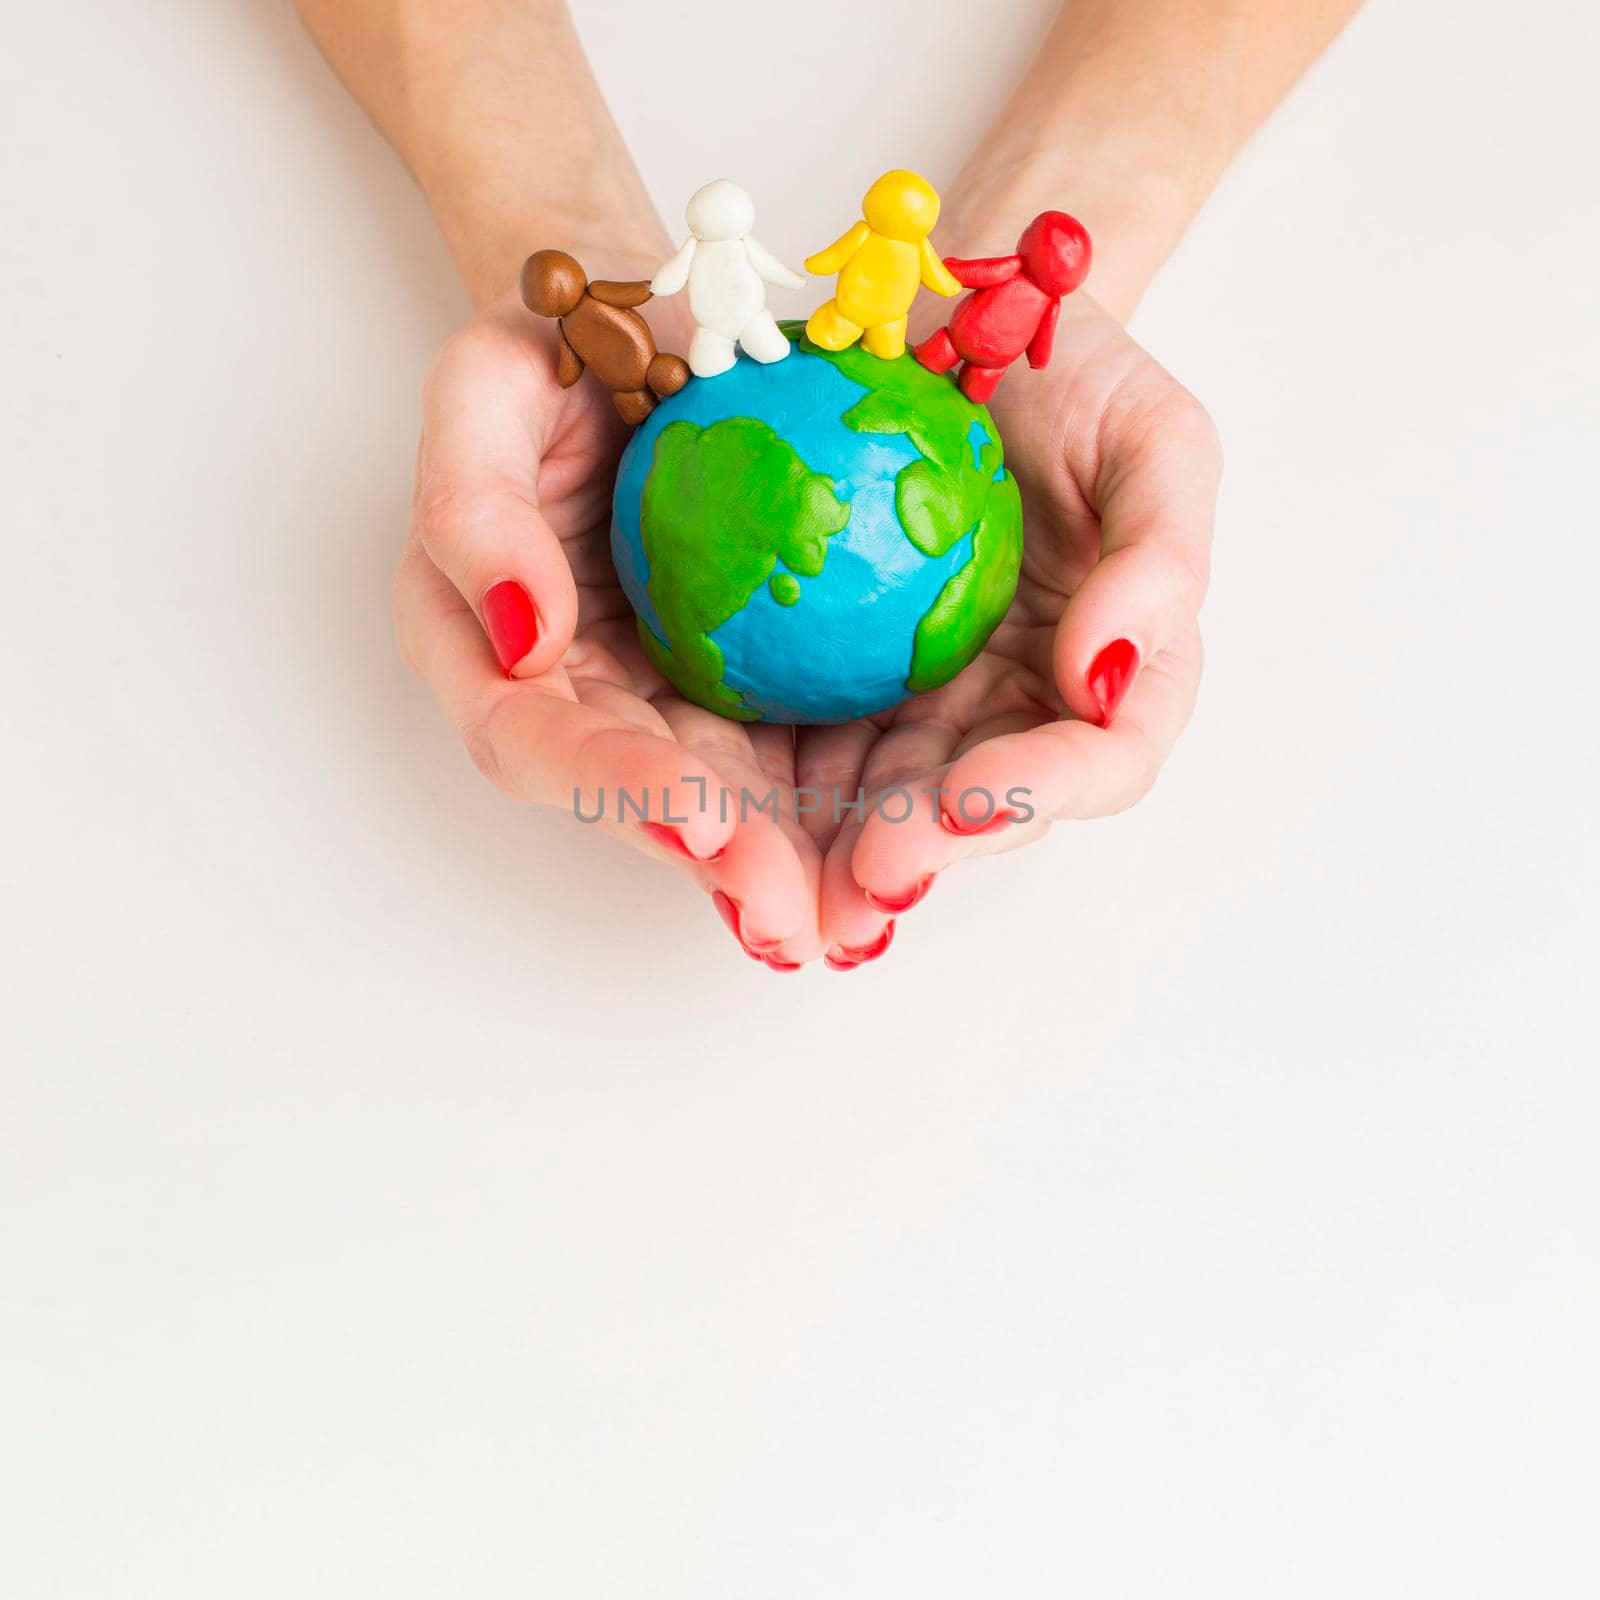 top view hands holding globe with people figurines. High quality photo by Zahard